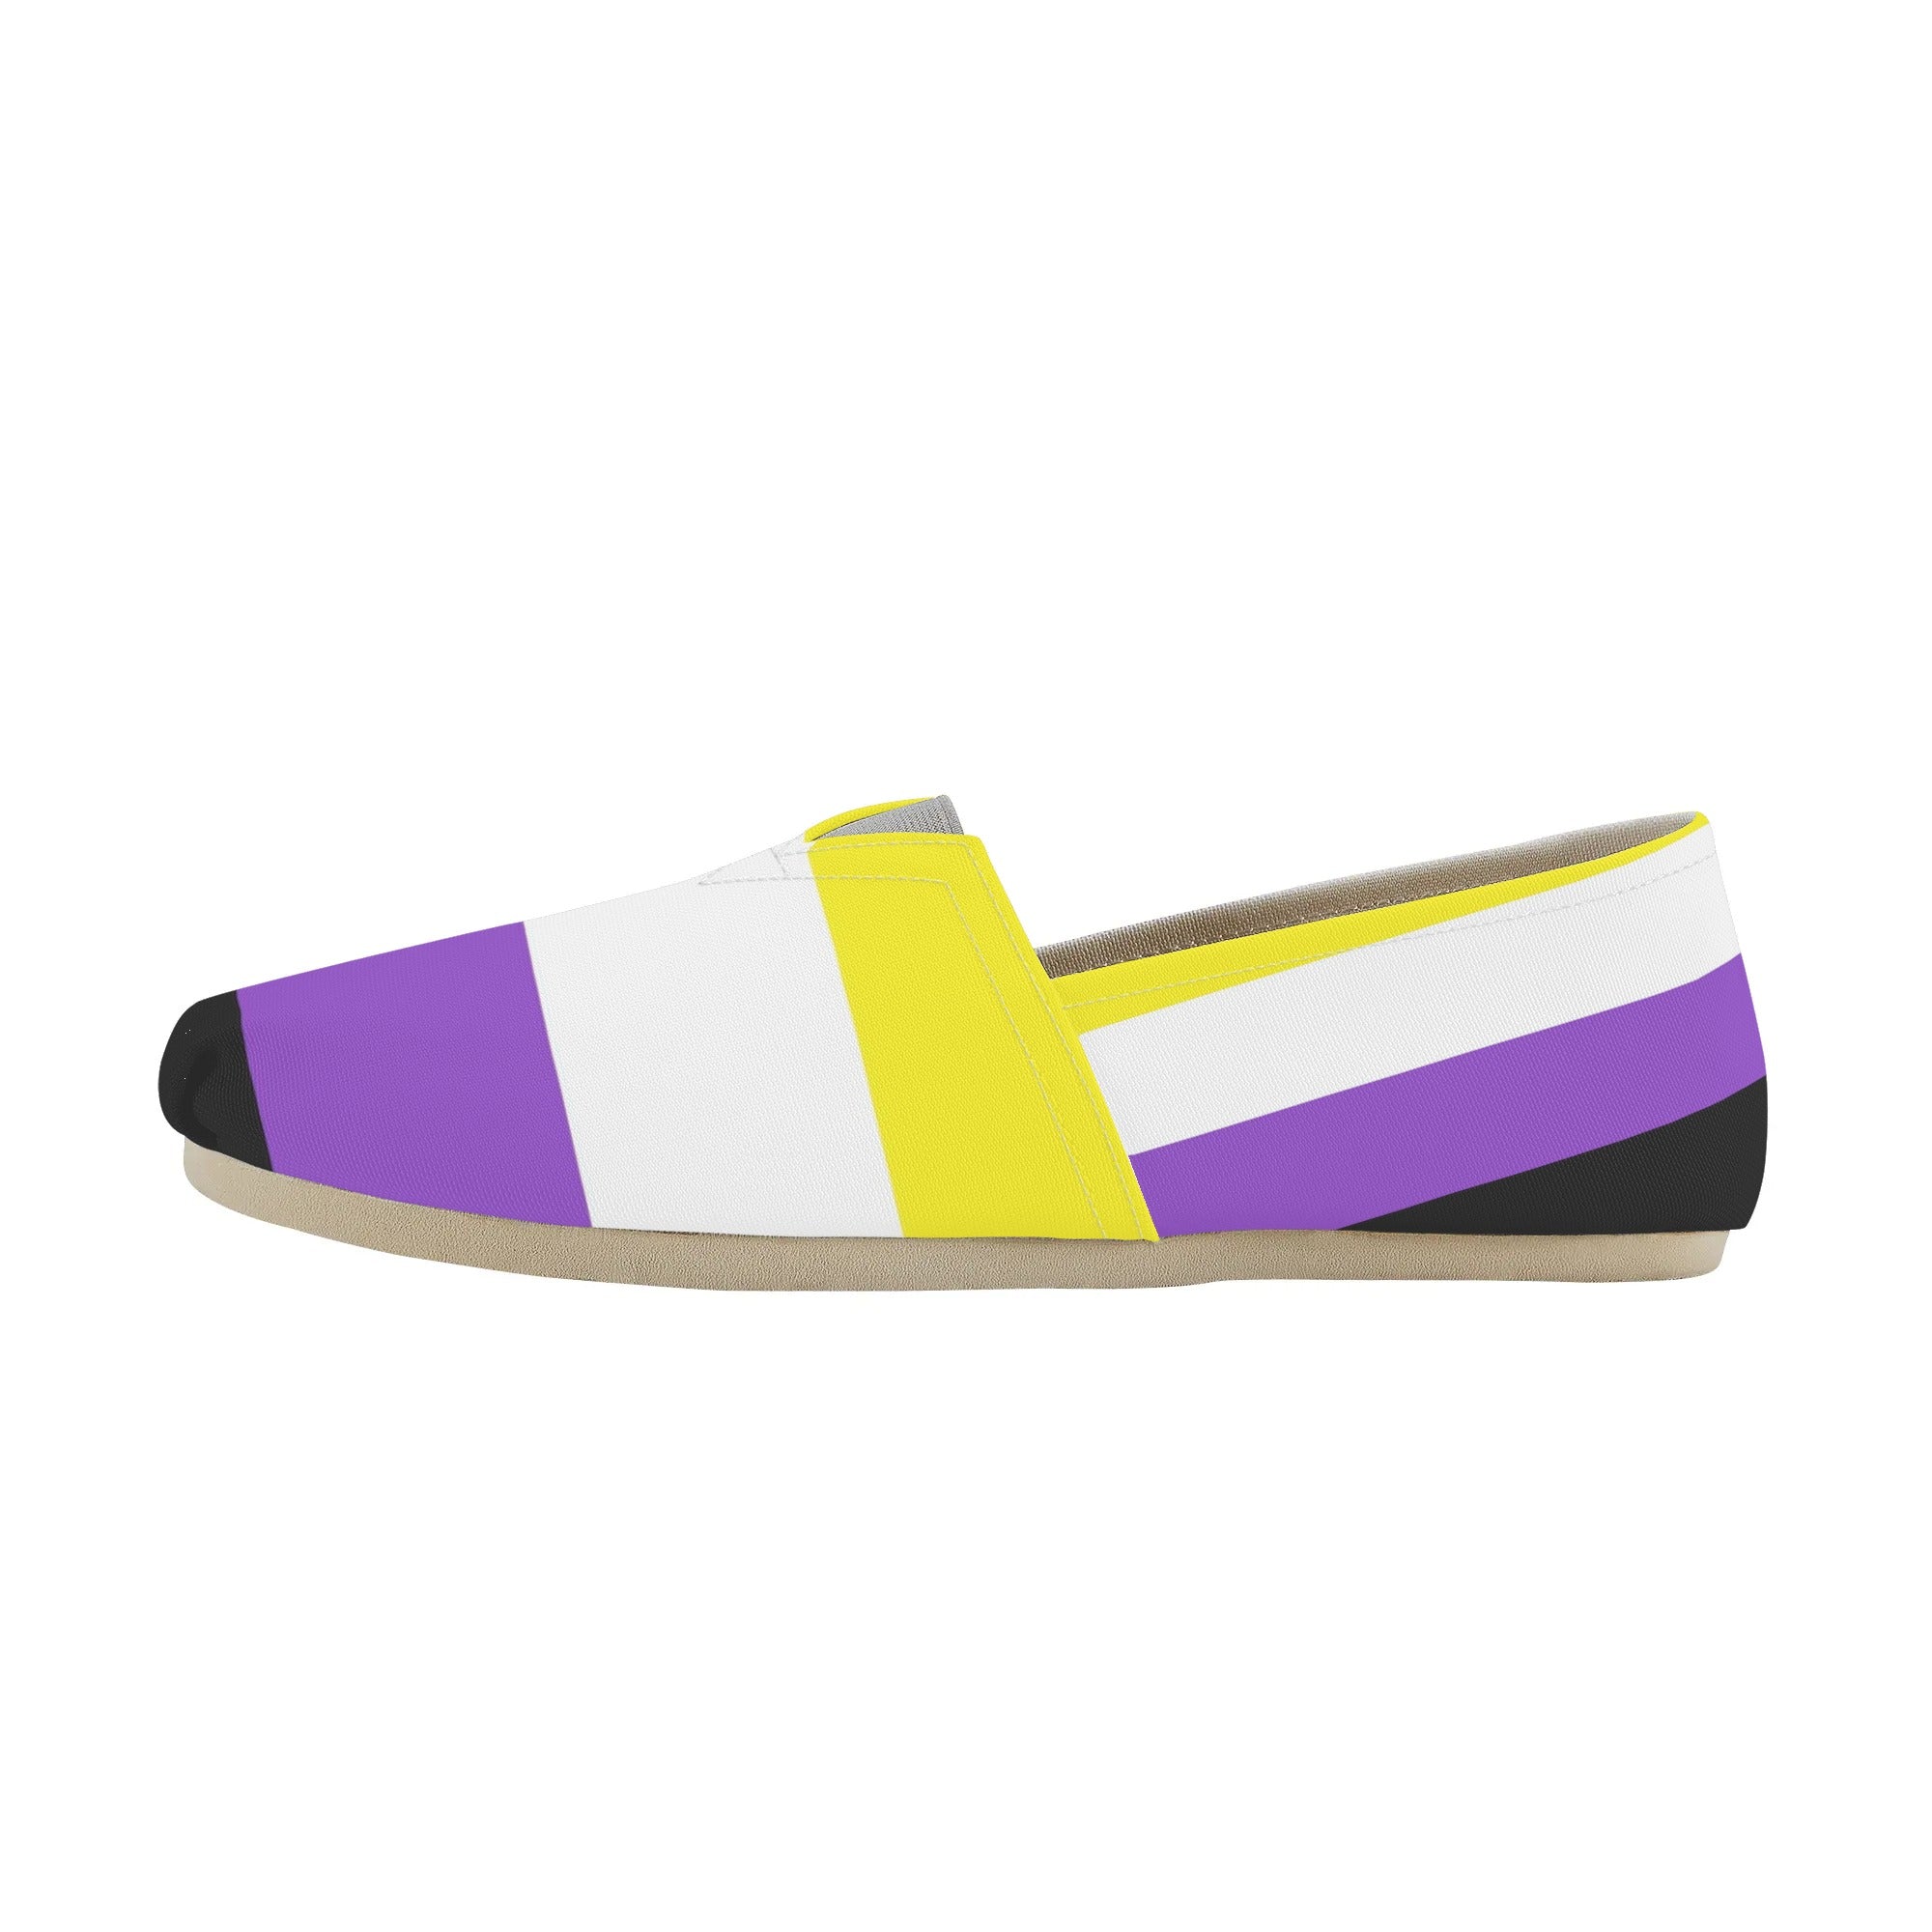 Non-binary Pride Flag Slip-On Canvas Shoes (Mens Sizing) - Rose Gold Co. Shop